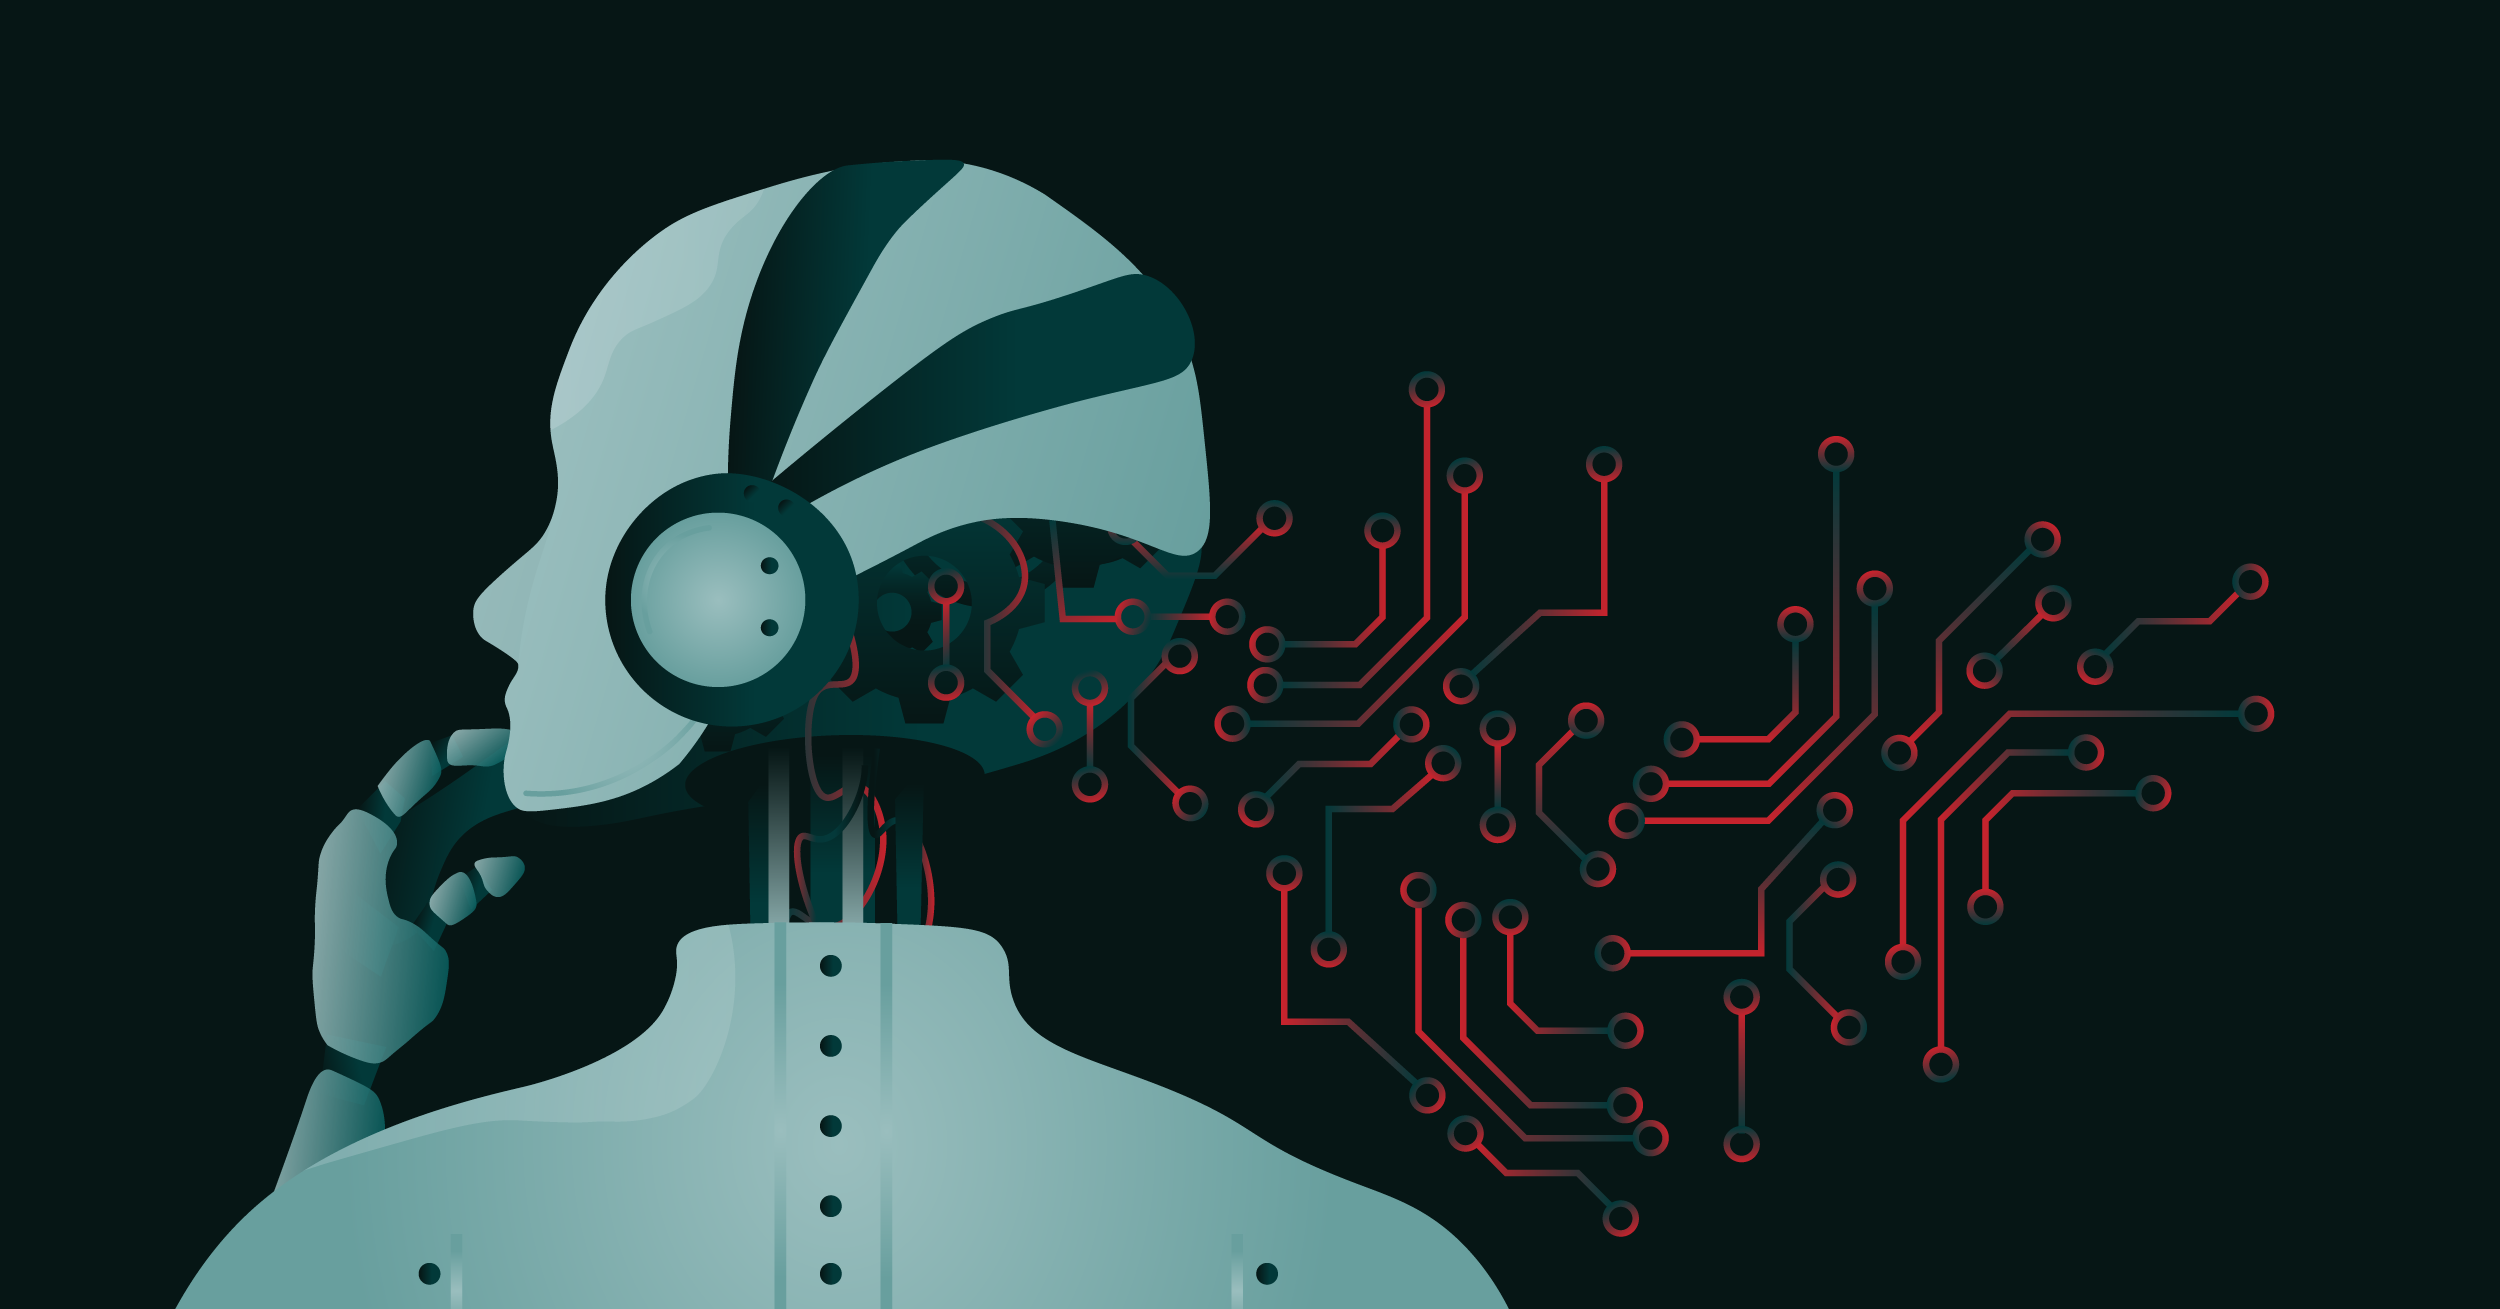 Illustration of AI depicted by a robot in thought with red and green circuit wires extending from its head, representing the robot's cognitive process